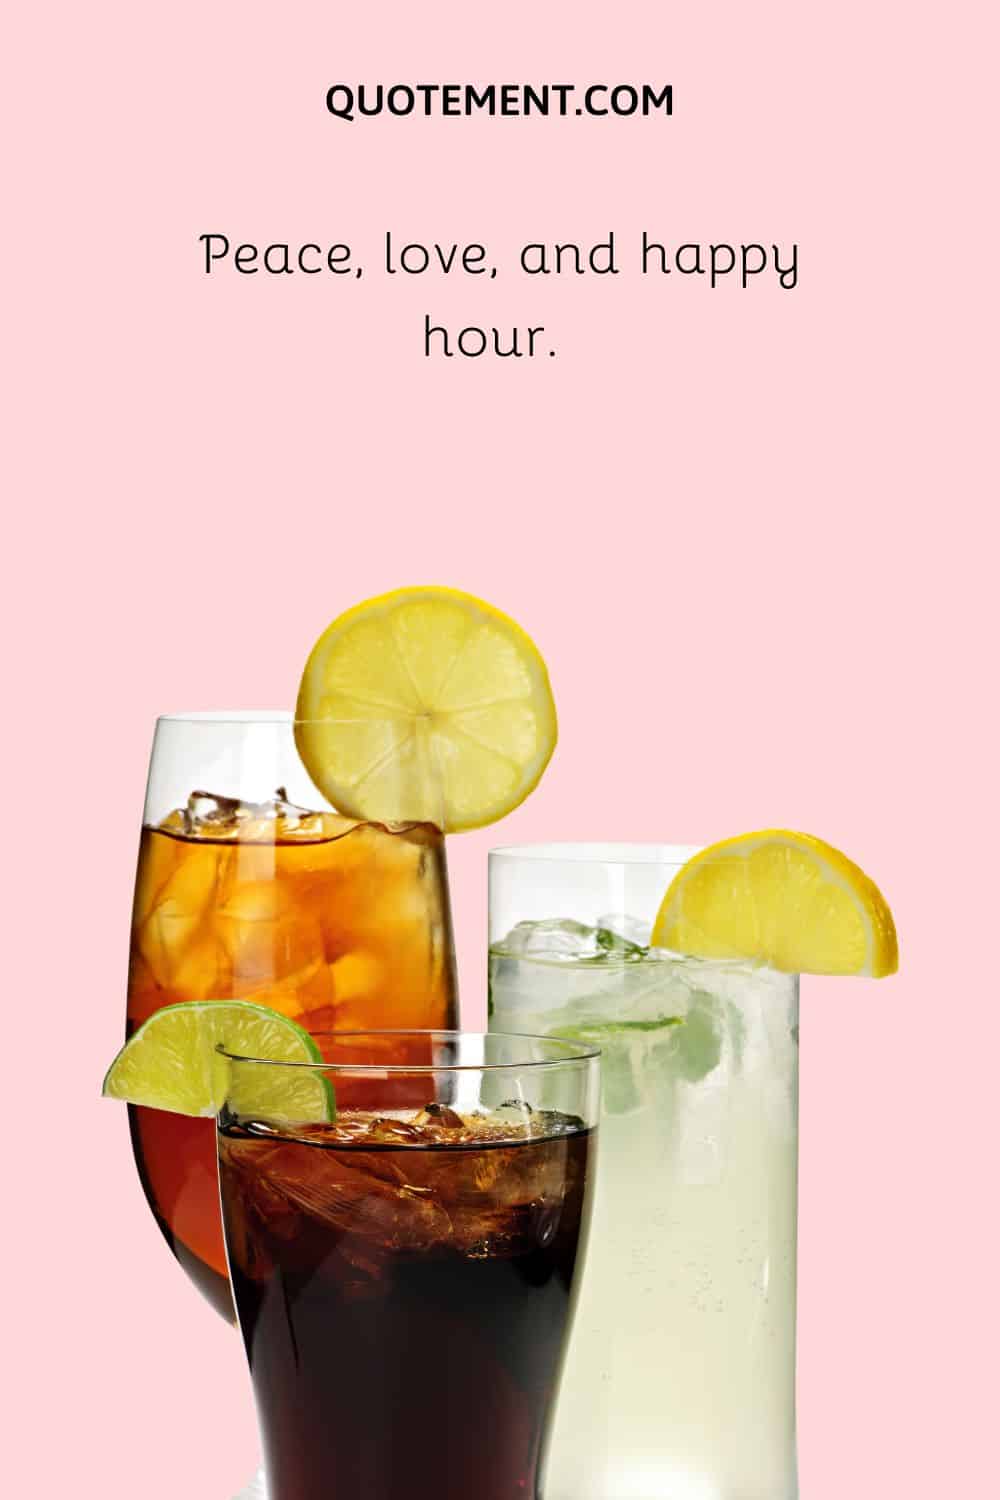 Peace, love, and happy hour